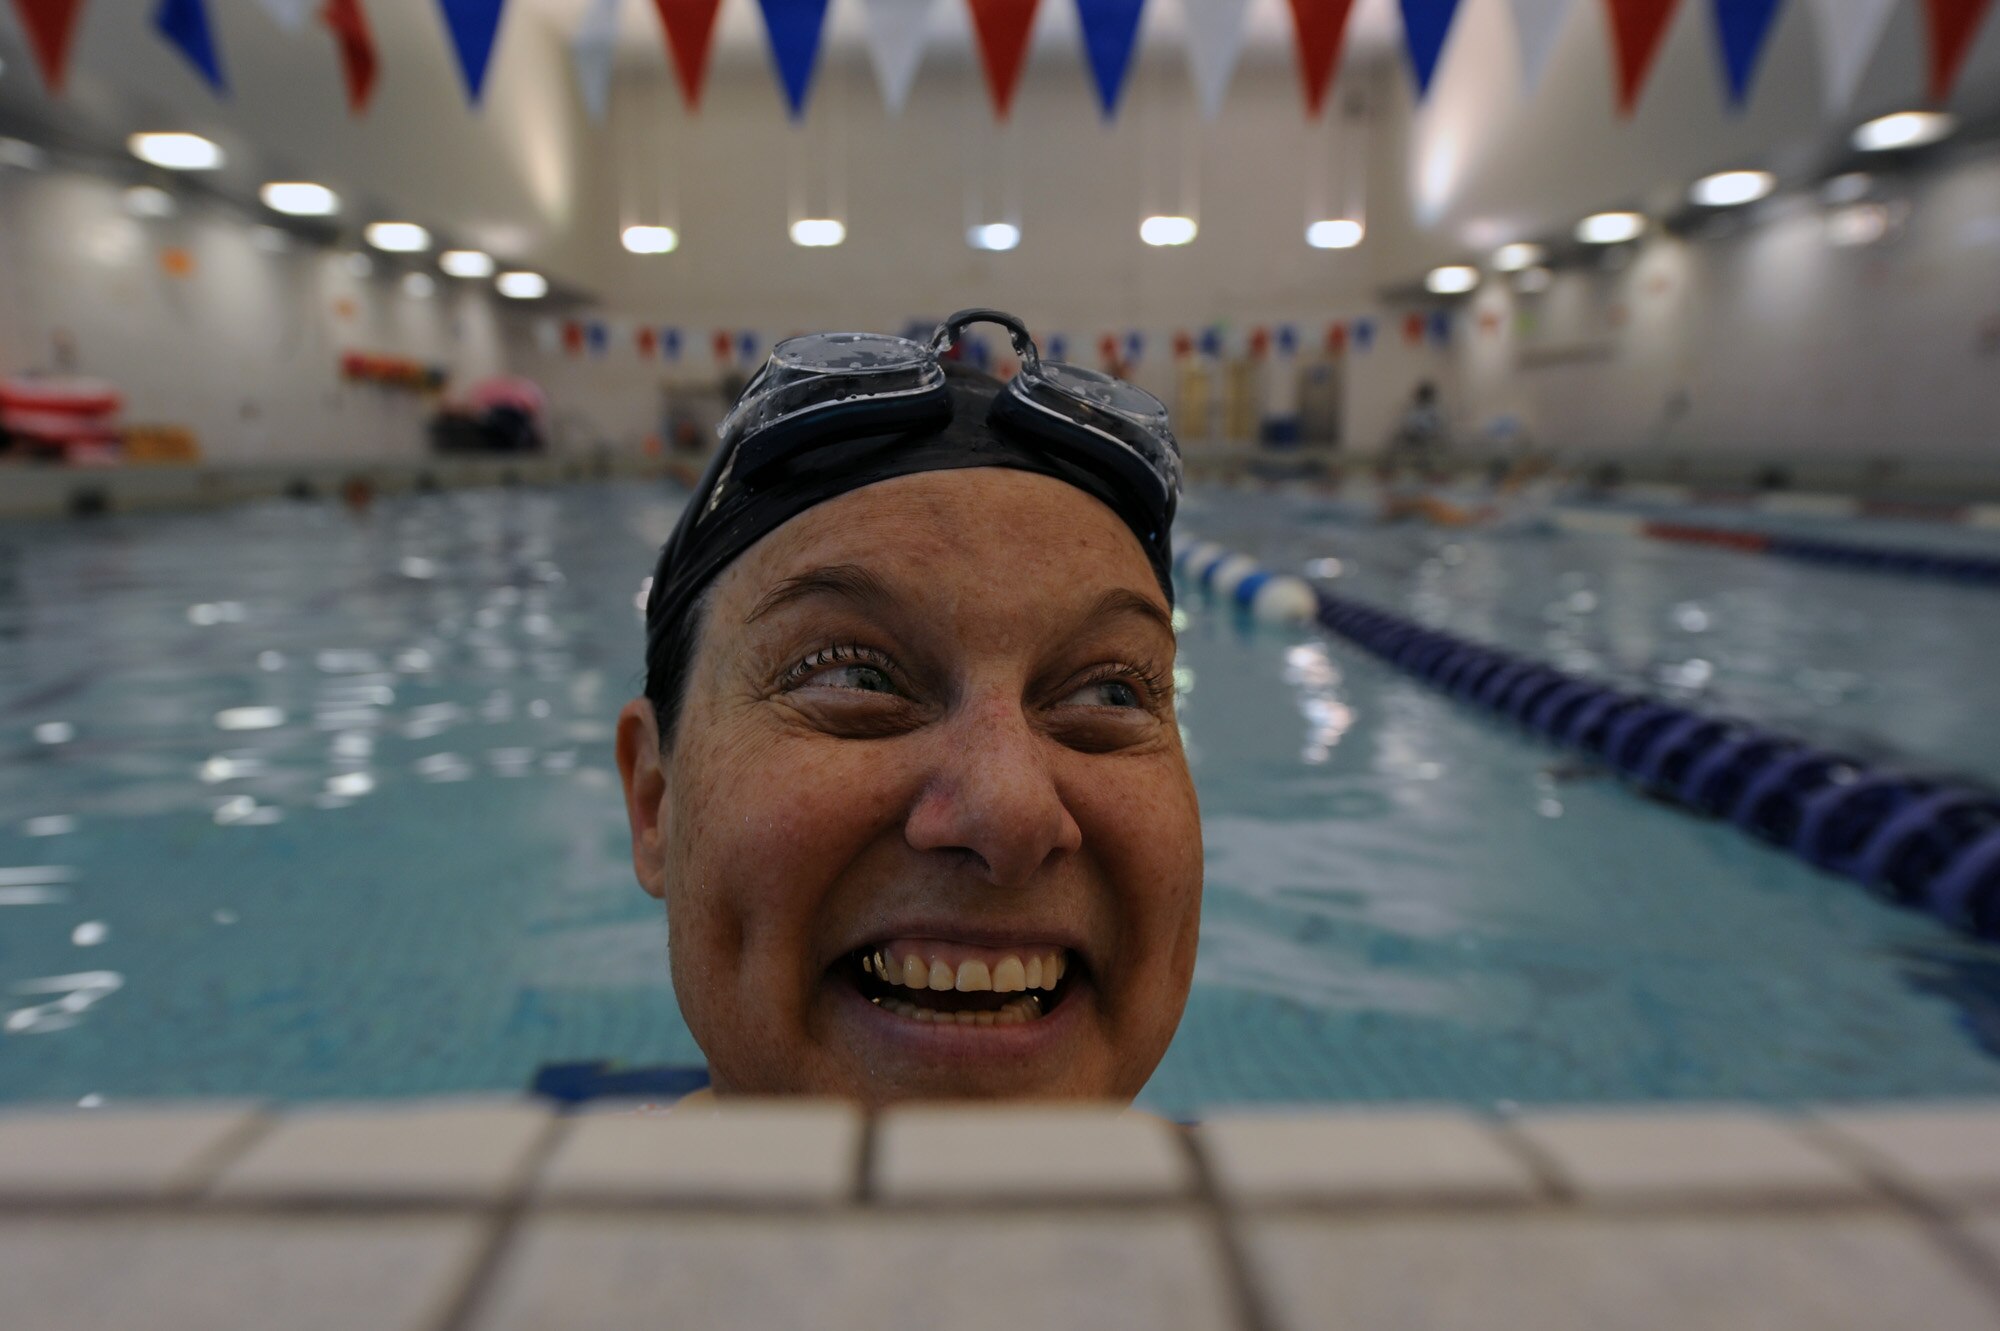 Jeanne Goldy-Sanitate smiles after finishing a lap in the swimming pool May 7, 2010, during her last day of training for the upcoming inaugural Warrior Games.  She and the other members of the Air Force team have been attending a training camp at the Air Force Academy in Colorado Springs, Colo. The Warrior Games competition began May 10 and finishes May 14 at the U.S. Olympic Training Center in Colorado Springs.  (U.S. Air Force photo/Staff Sgt. Desiree N. Palacios)